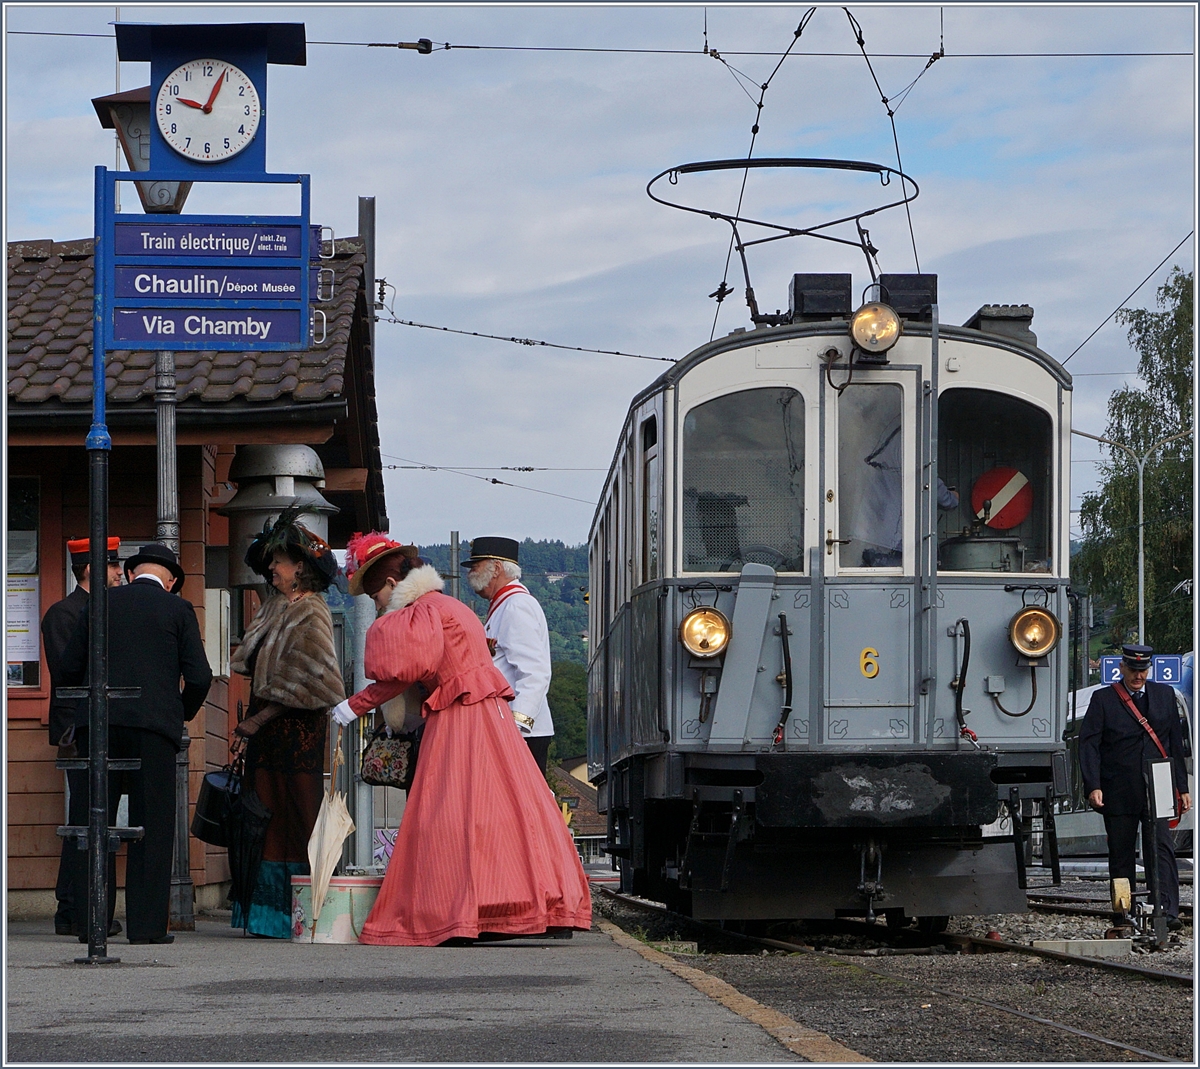 Belle Epoque - Weekend by the Blonay-Chamby!
The MCB BCFe 4/4 N° 6 in Blonay is waiting for his departure.
17.09.2017
